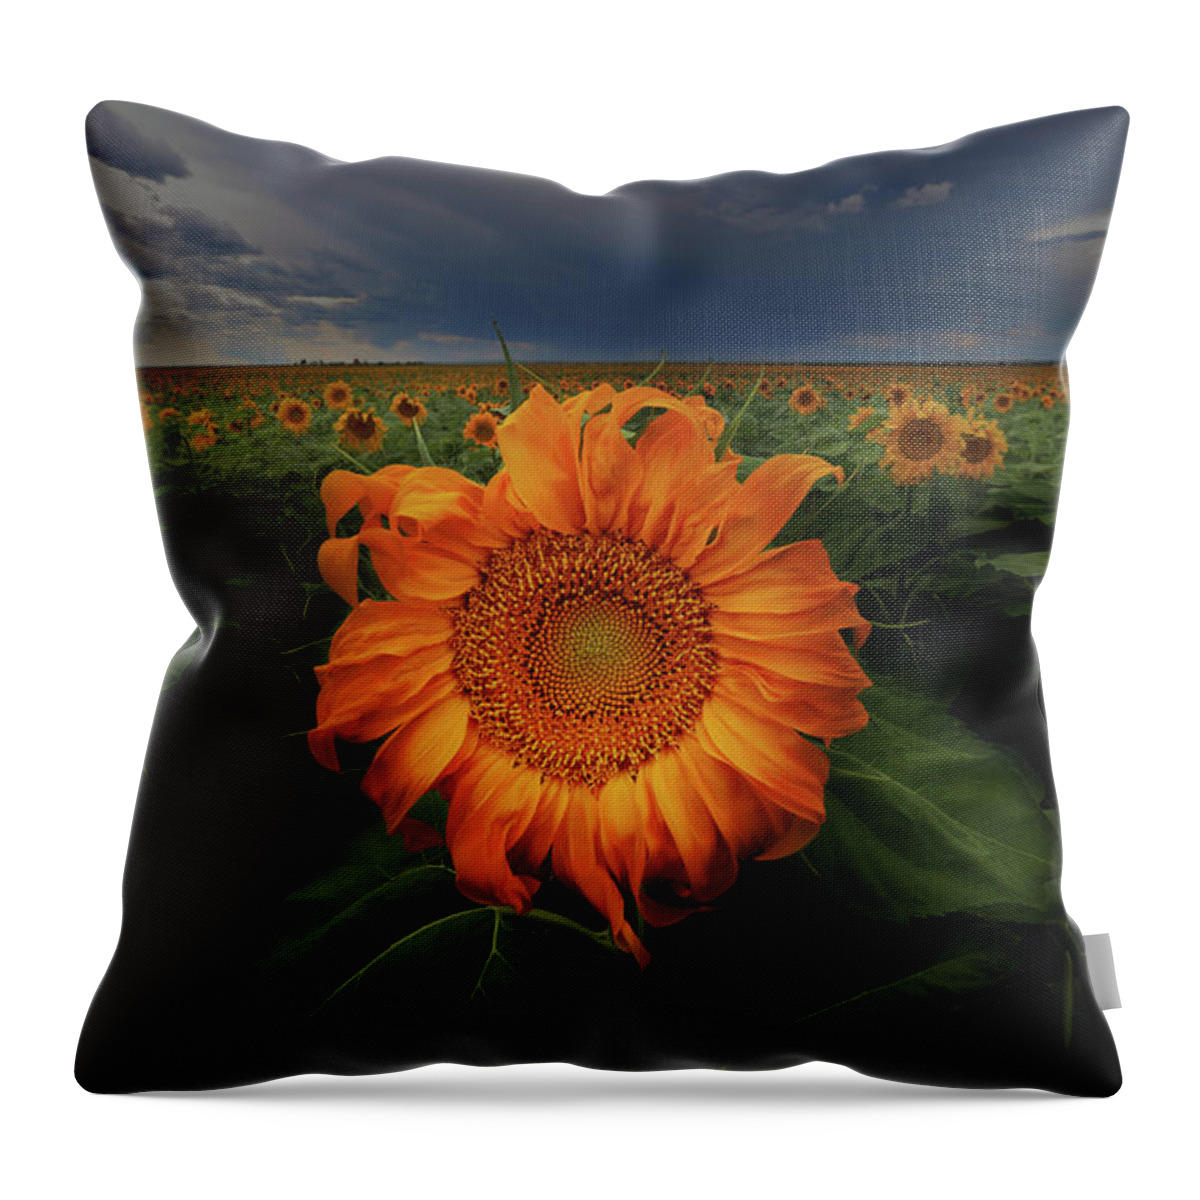 Sunflower Throw Pillow featuring the photograph Not Just Another Face In The Crowd by Brian Gustafson